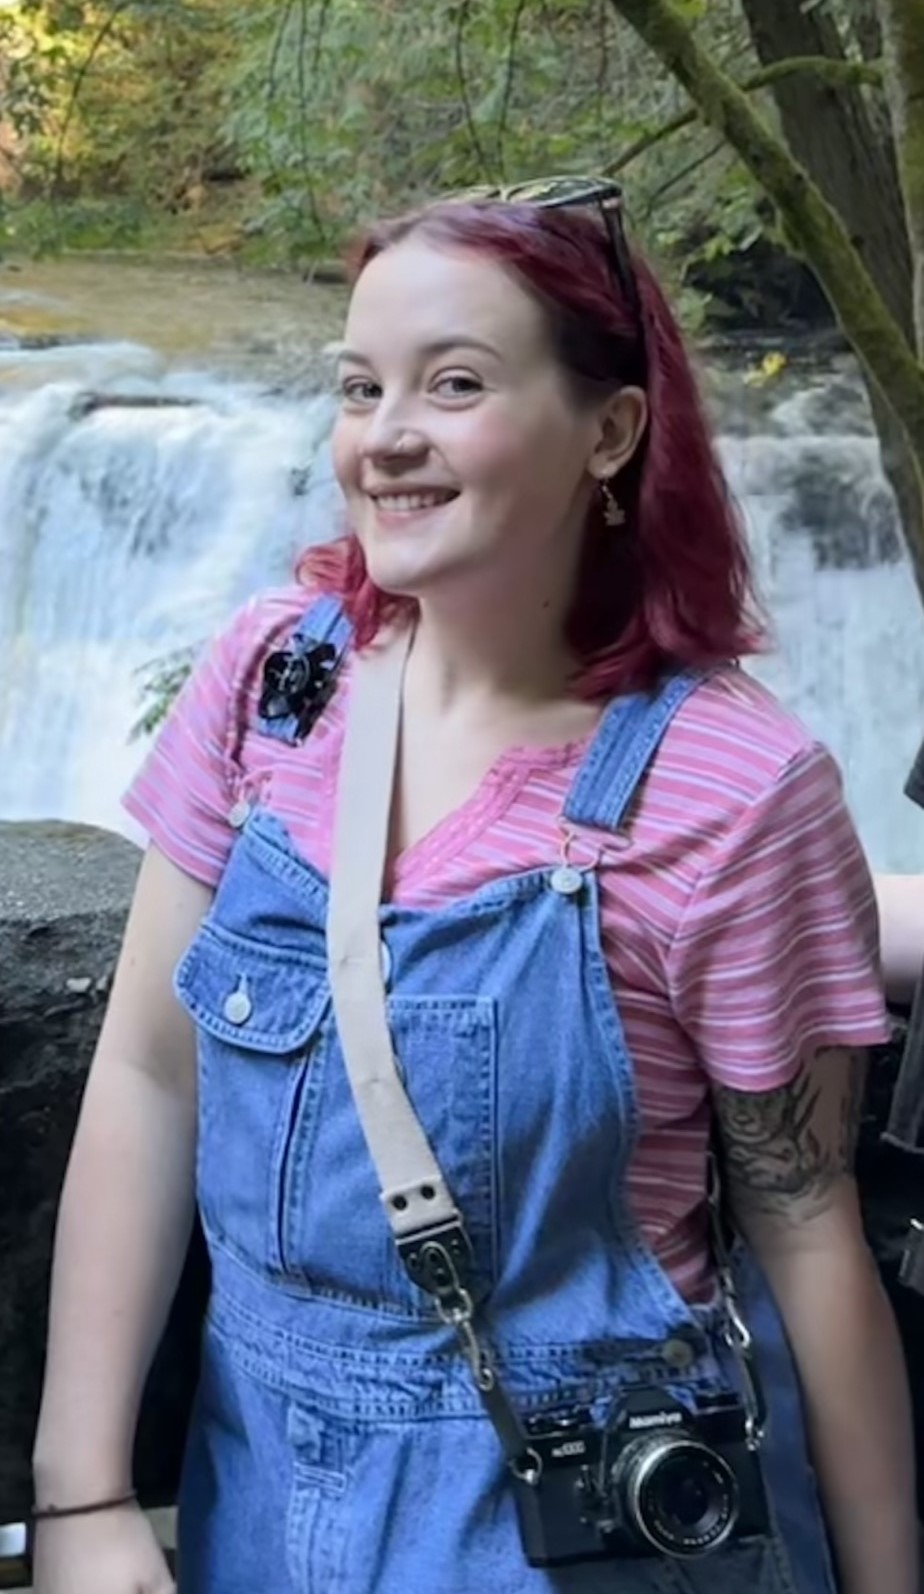 Abi smiling, wearing a striped pink shirt and denim overalls and a camera around neck; standing in front of waterfall